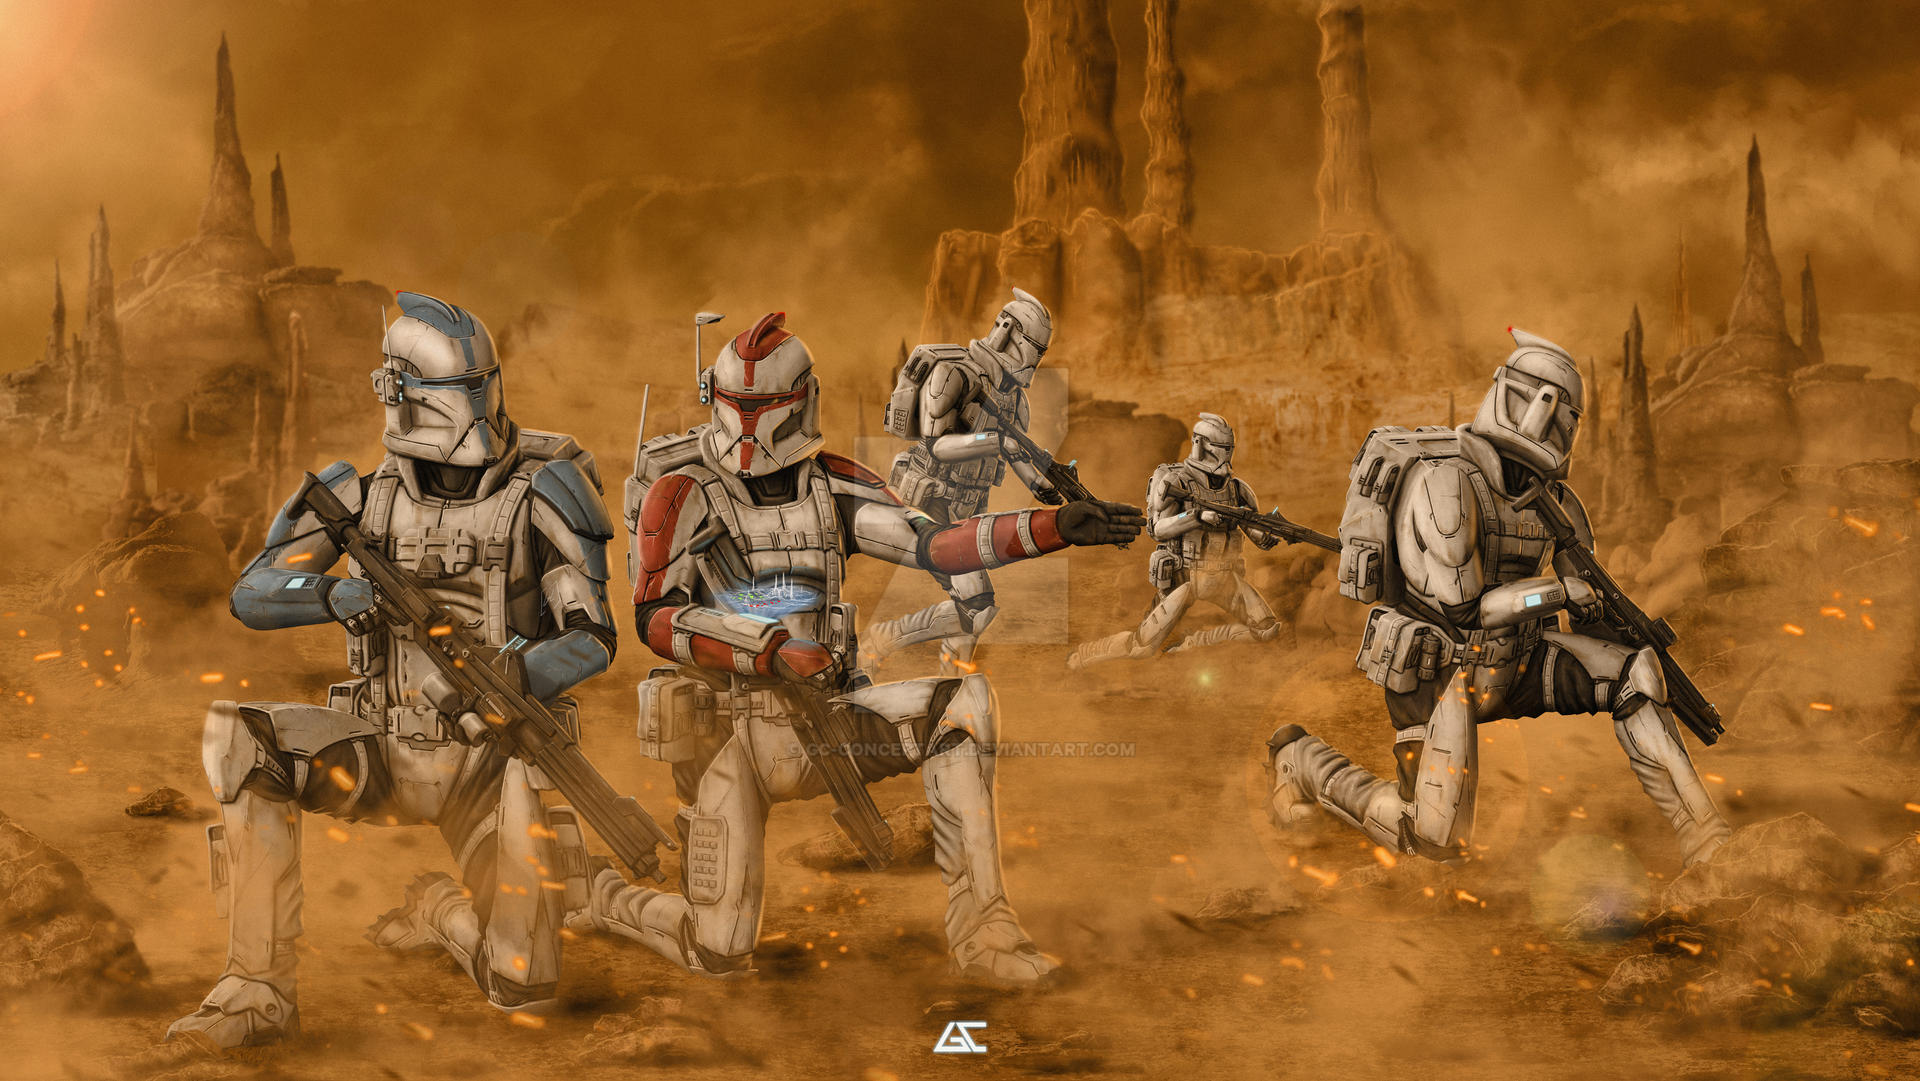 star_wars___clone_captain_and_liutenant_redesign_by_gc_conceptart_dg4jhji-fullview.jpg